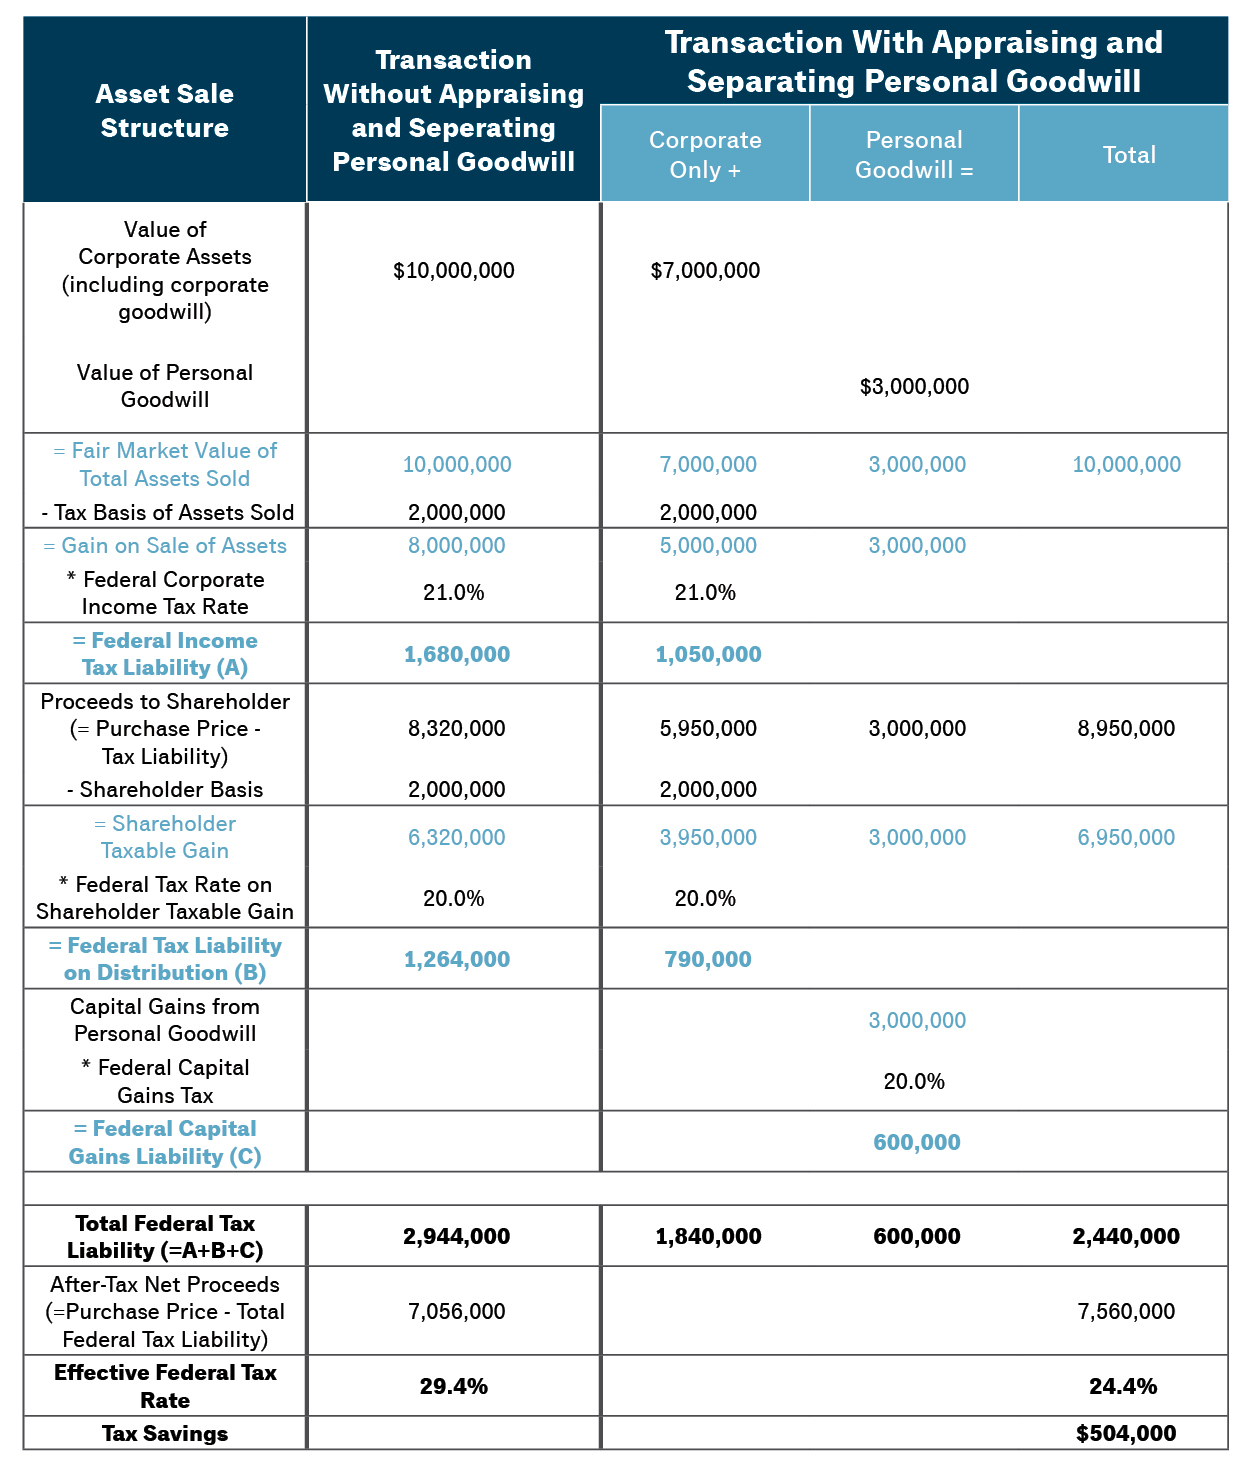 Table 2: Personal Goodwill-Related Tax Savings: A Hypothetical Deal Example